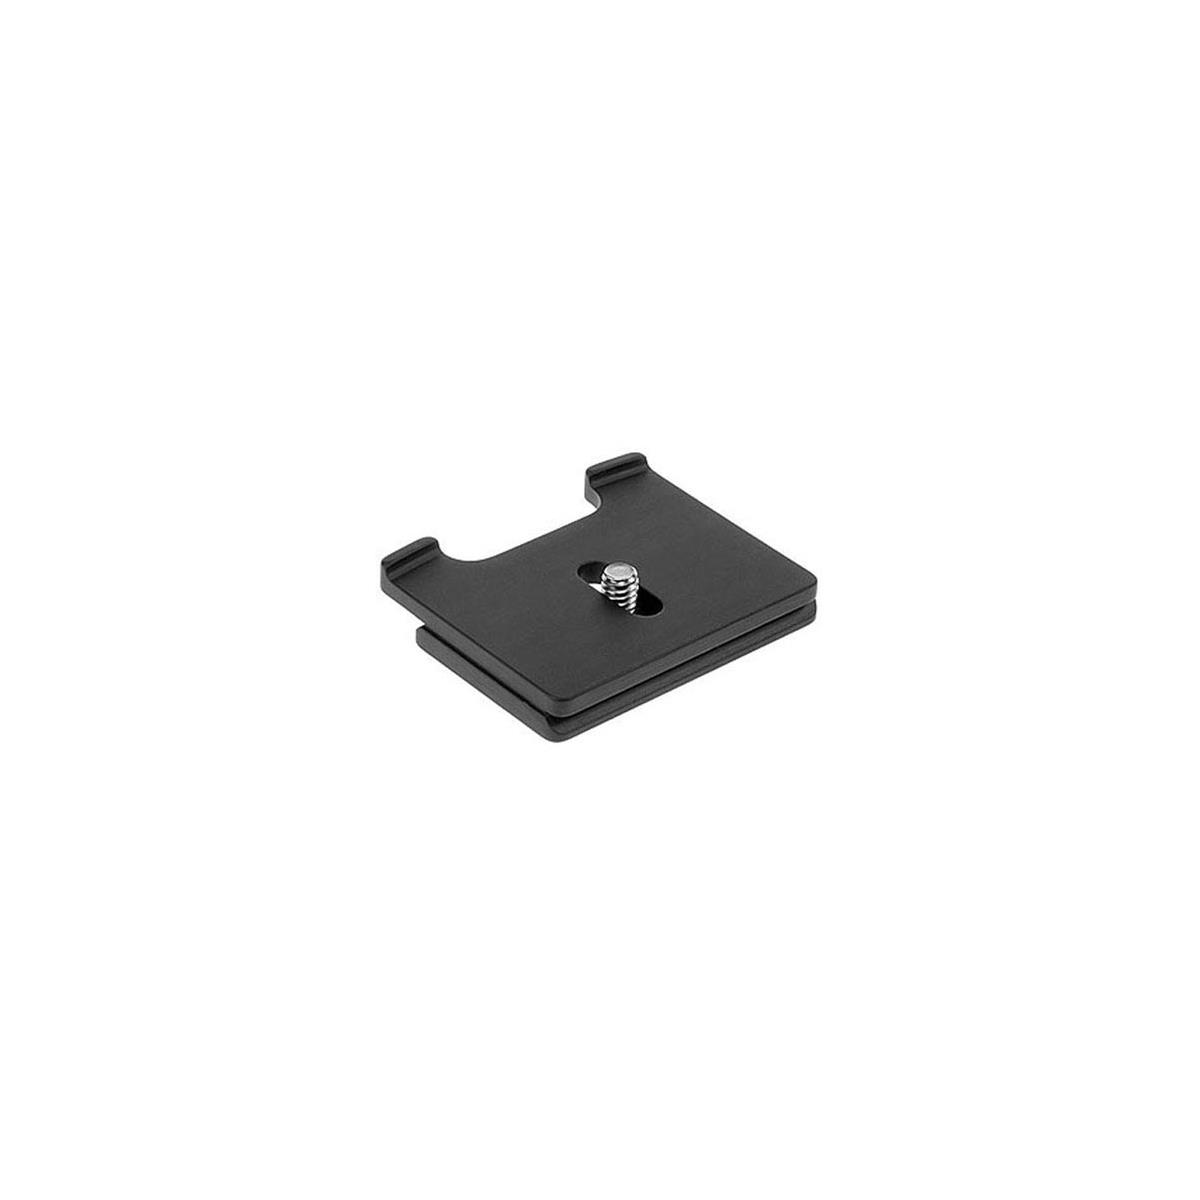 Image of Acratech 2163 Quick Release Plate for Sony A100